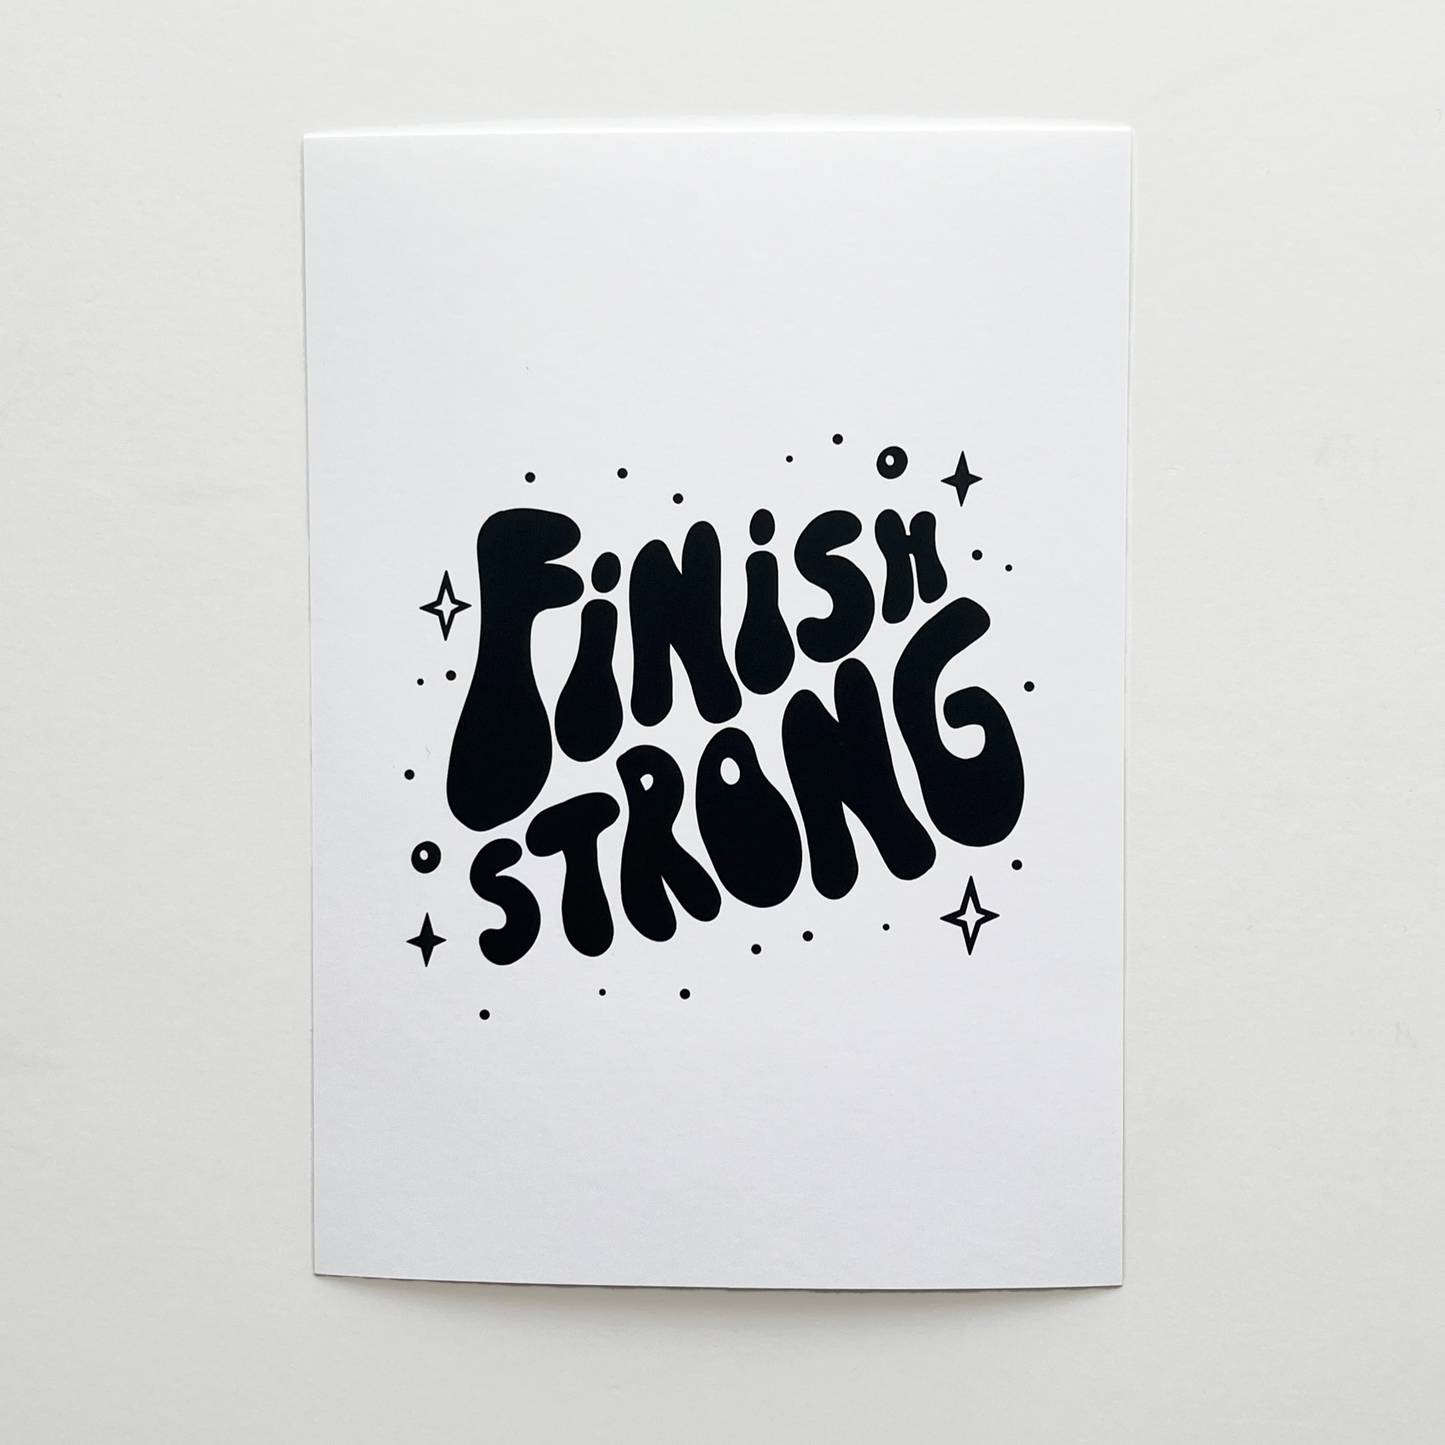 finish strong art print in black and white